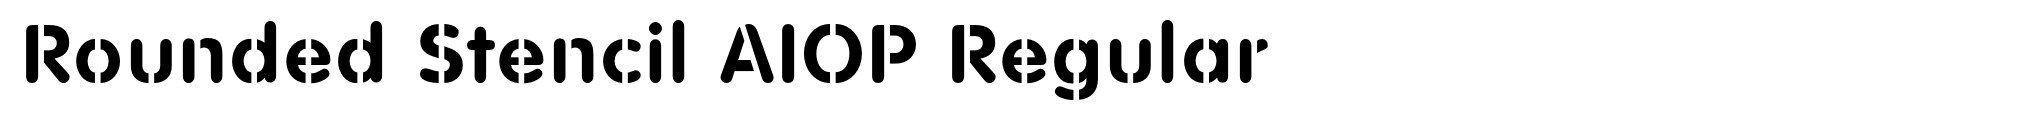 Rounded Stencil AIOP Regular image